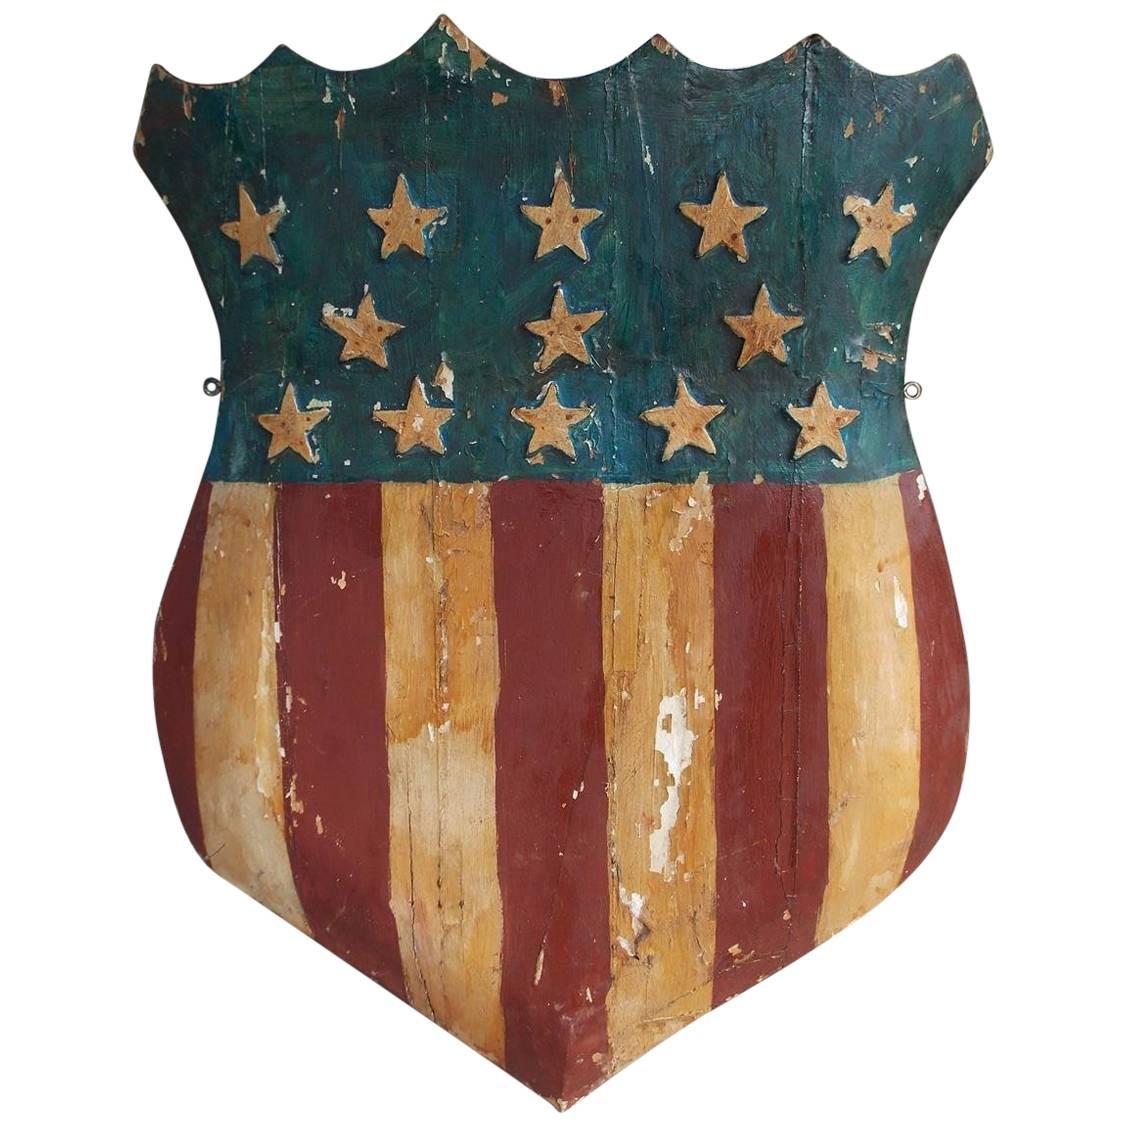 American Hand-Carved & Painted Patriotic Shield with Raised Stars, 19th Century